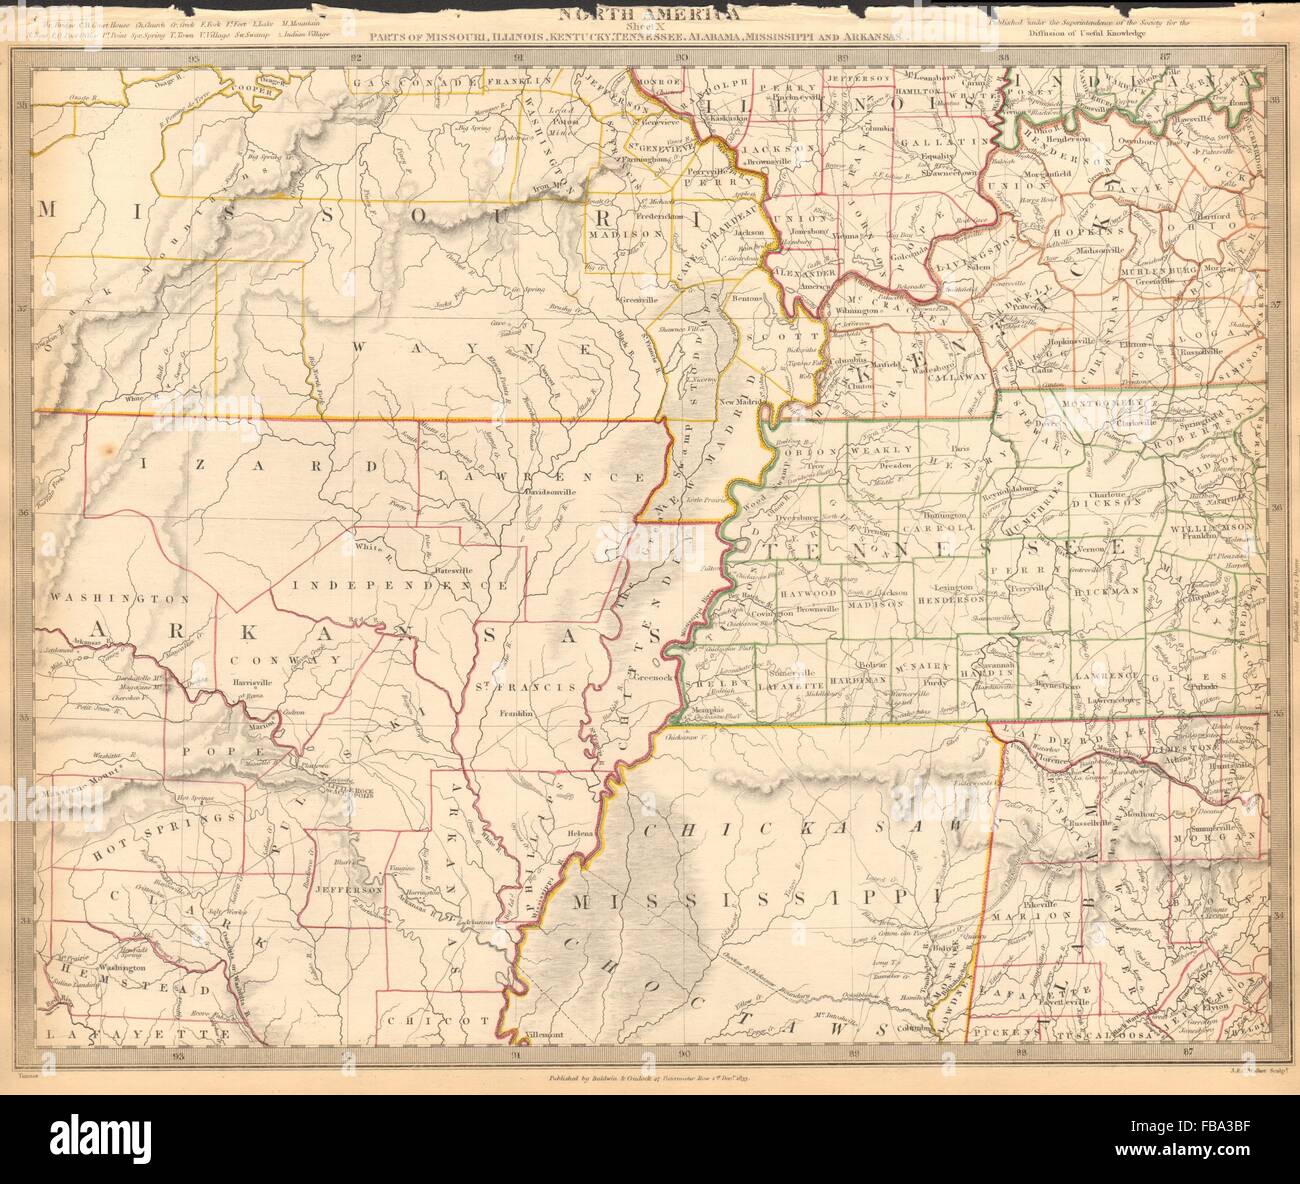 USA. AR MO TN MS IL IN KY AL. Choctaw Chickasaw boundaries. SDUK, 1844 old map Stock Photo